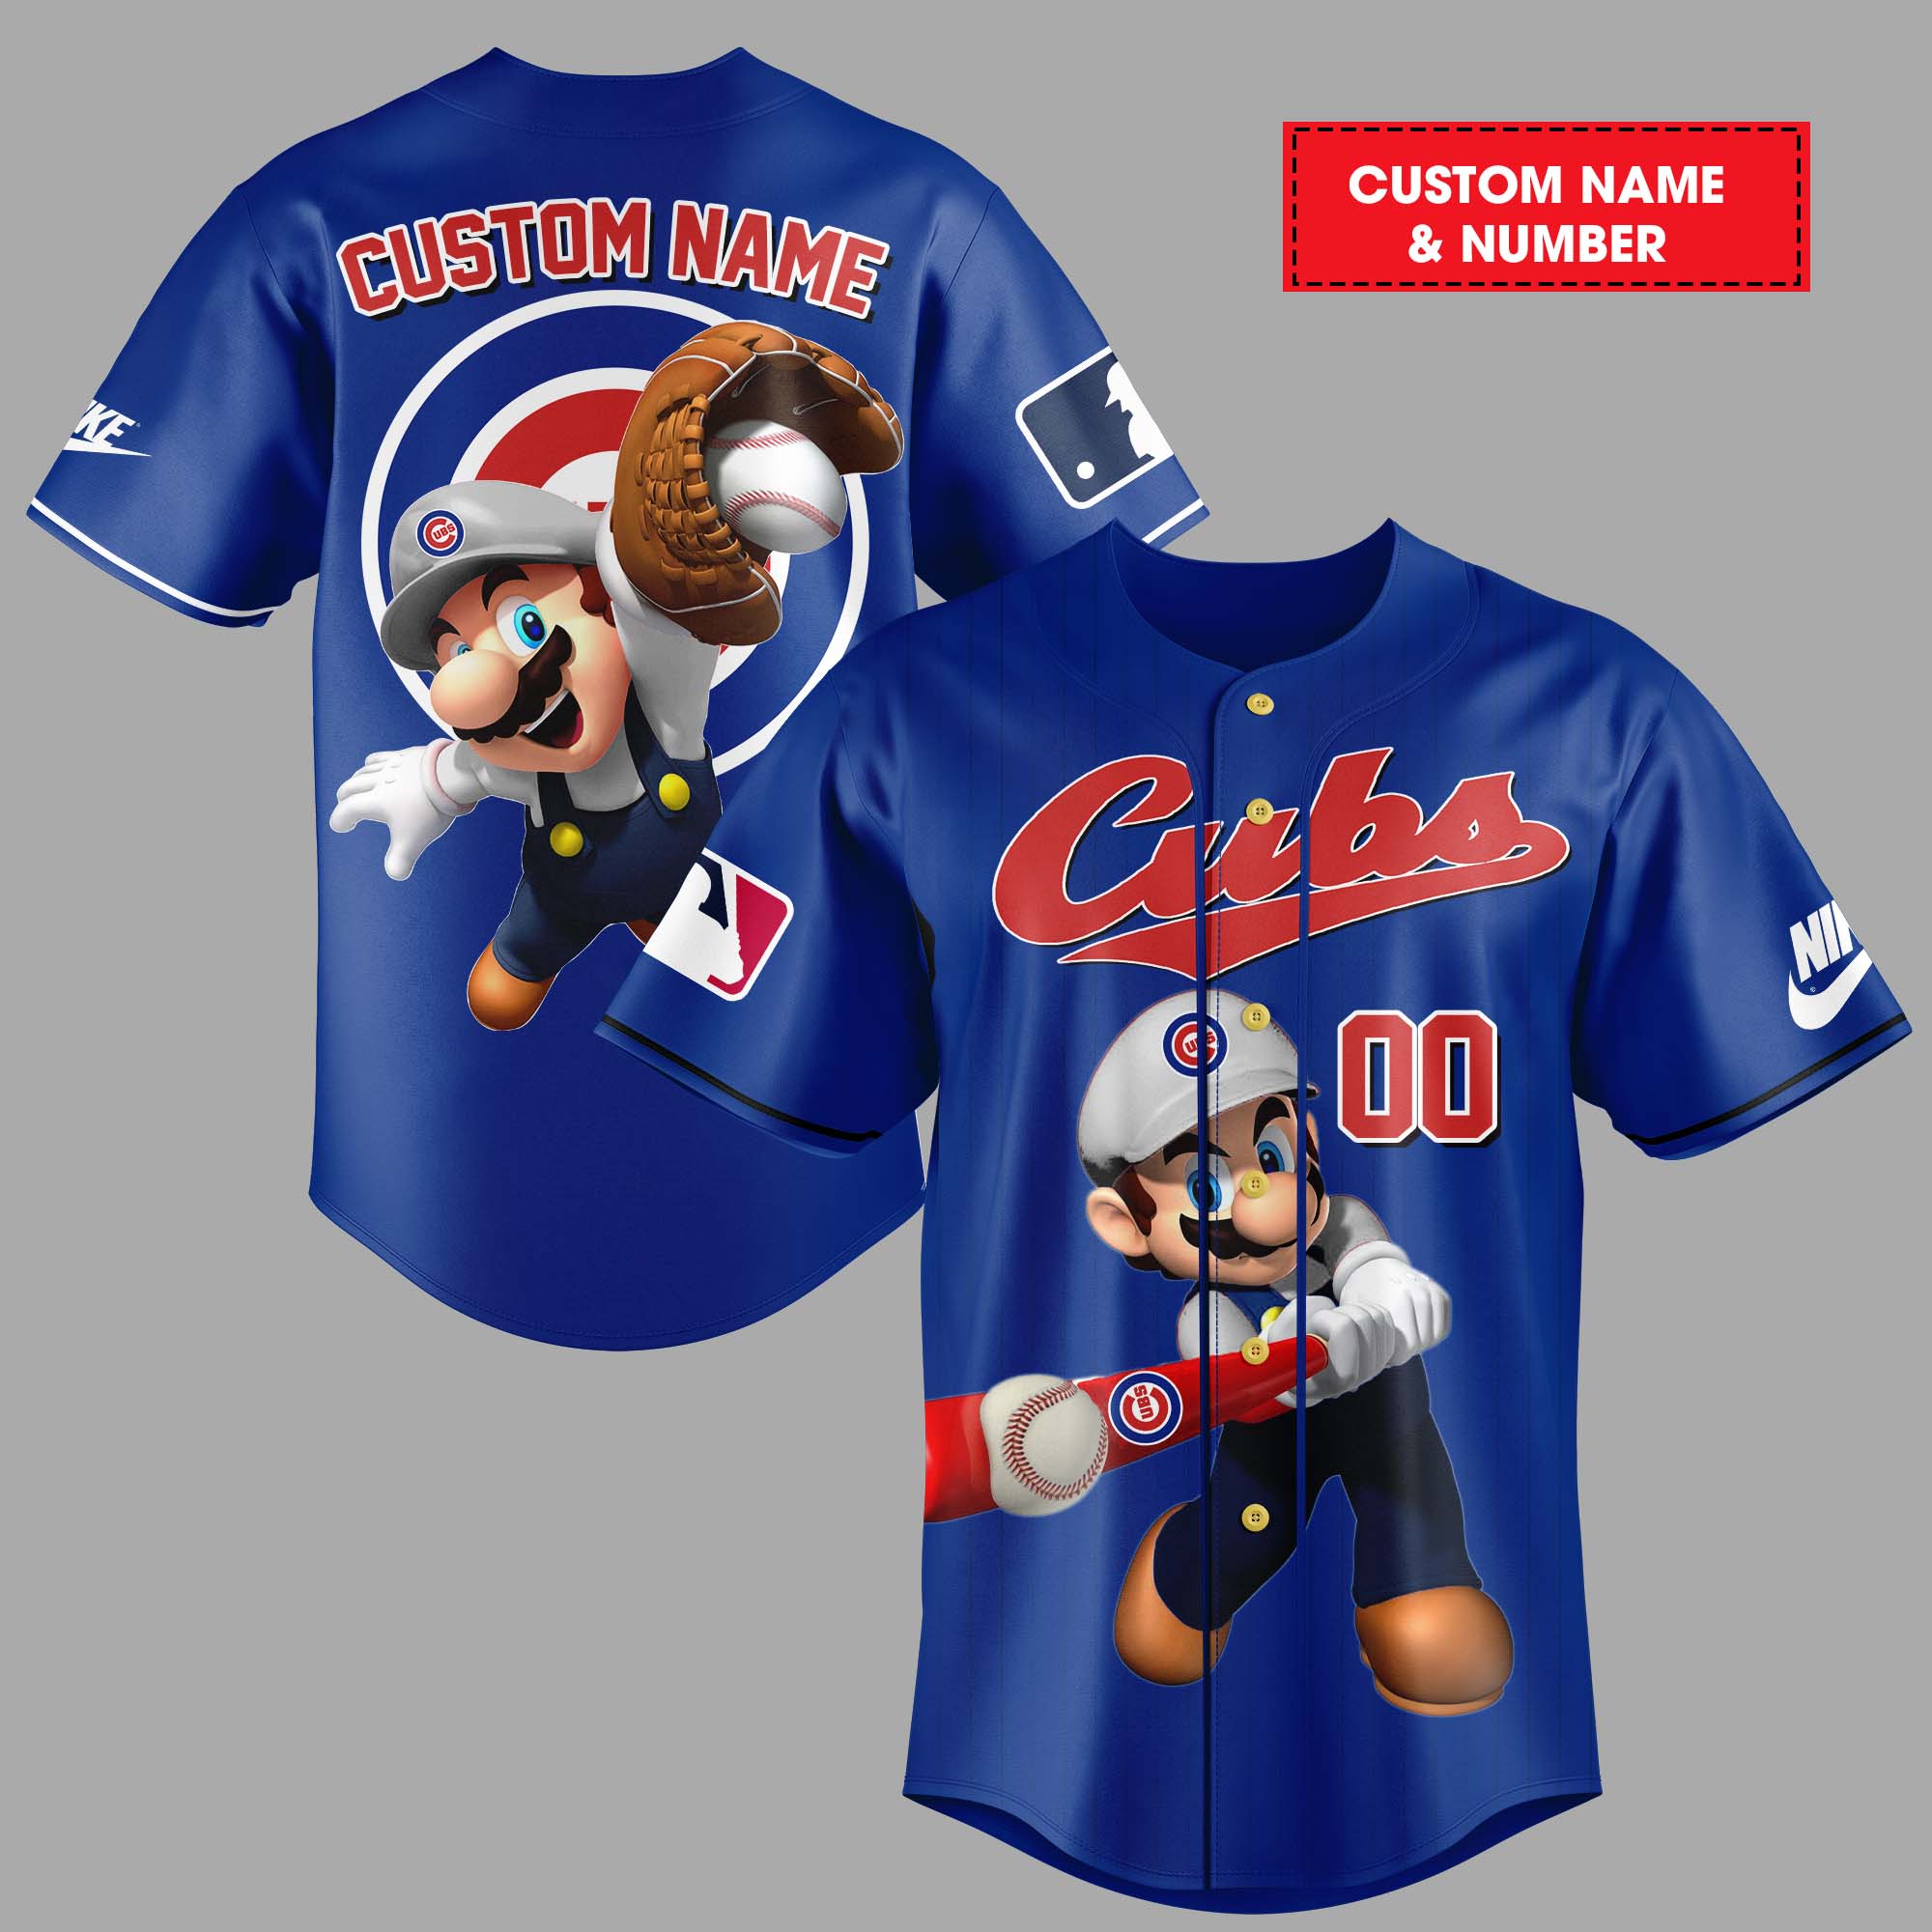 TRENDING] Chicago Cubs MLB-Personalized Hawaiian Shirt, 42% OFF